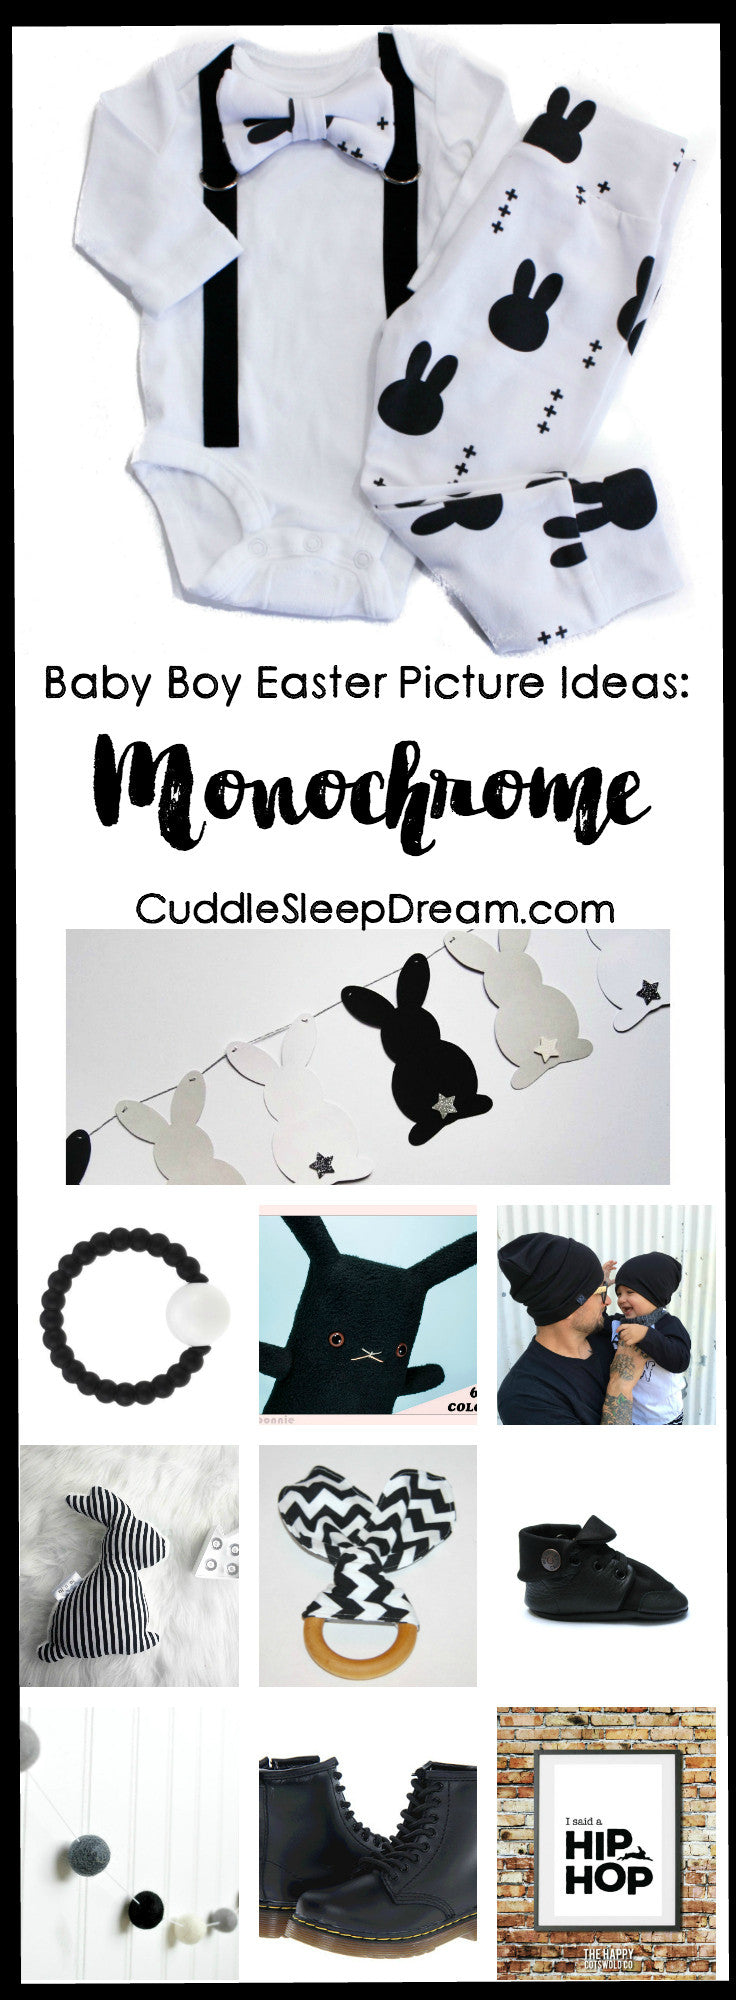 baby boy easter picture ideas: monochrome